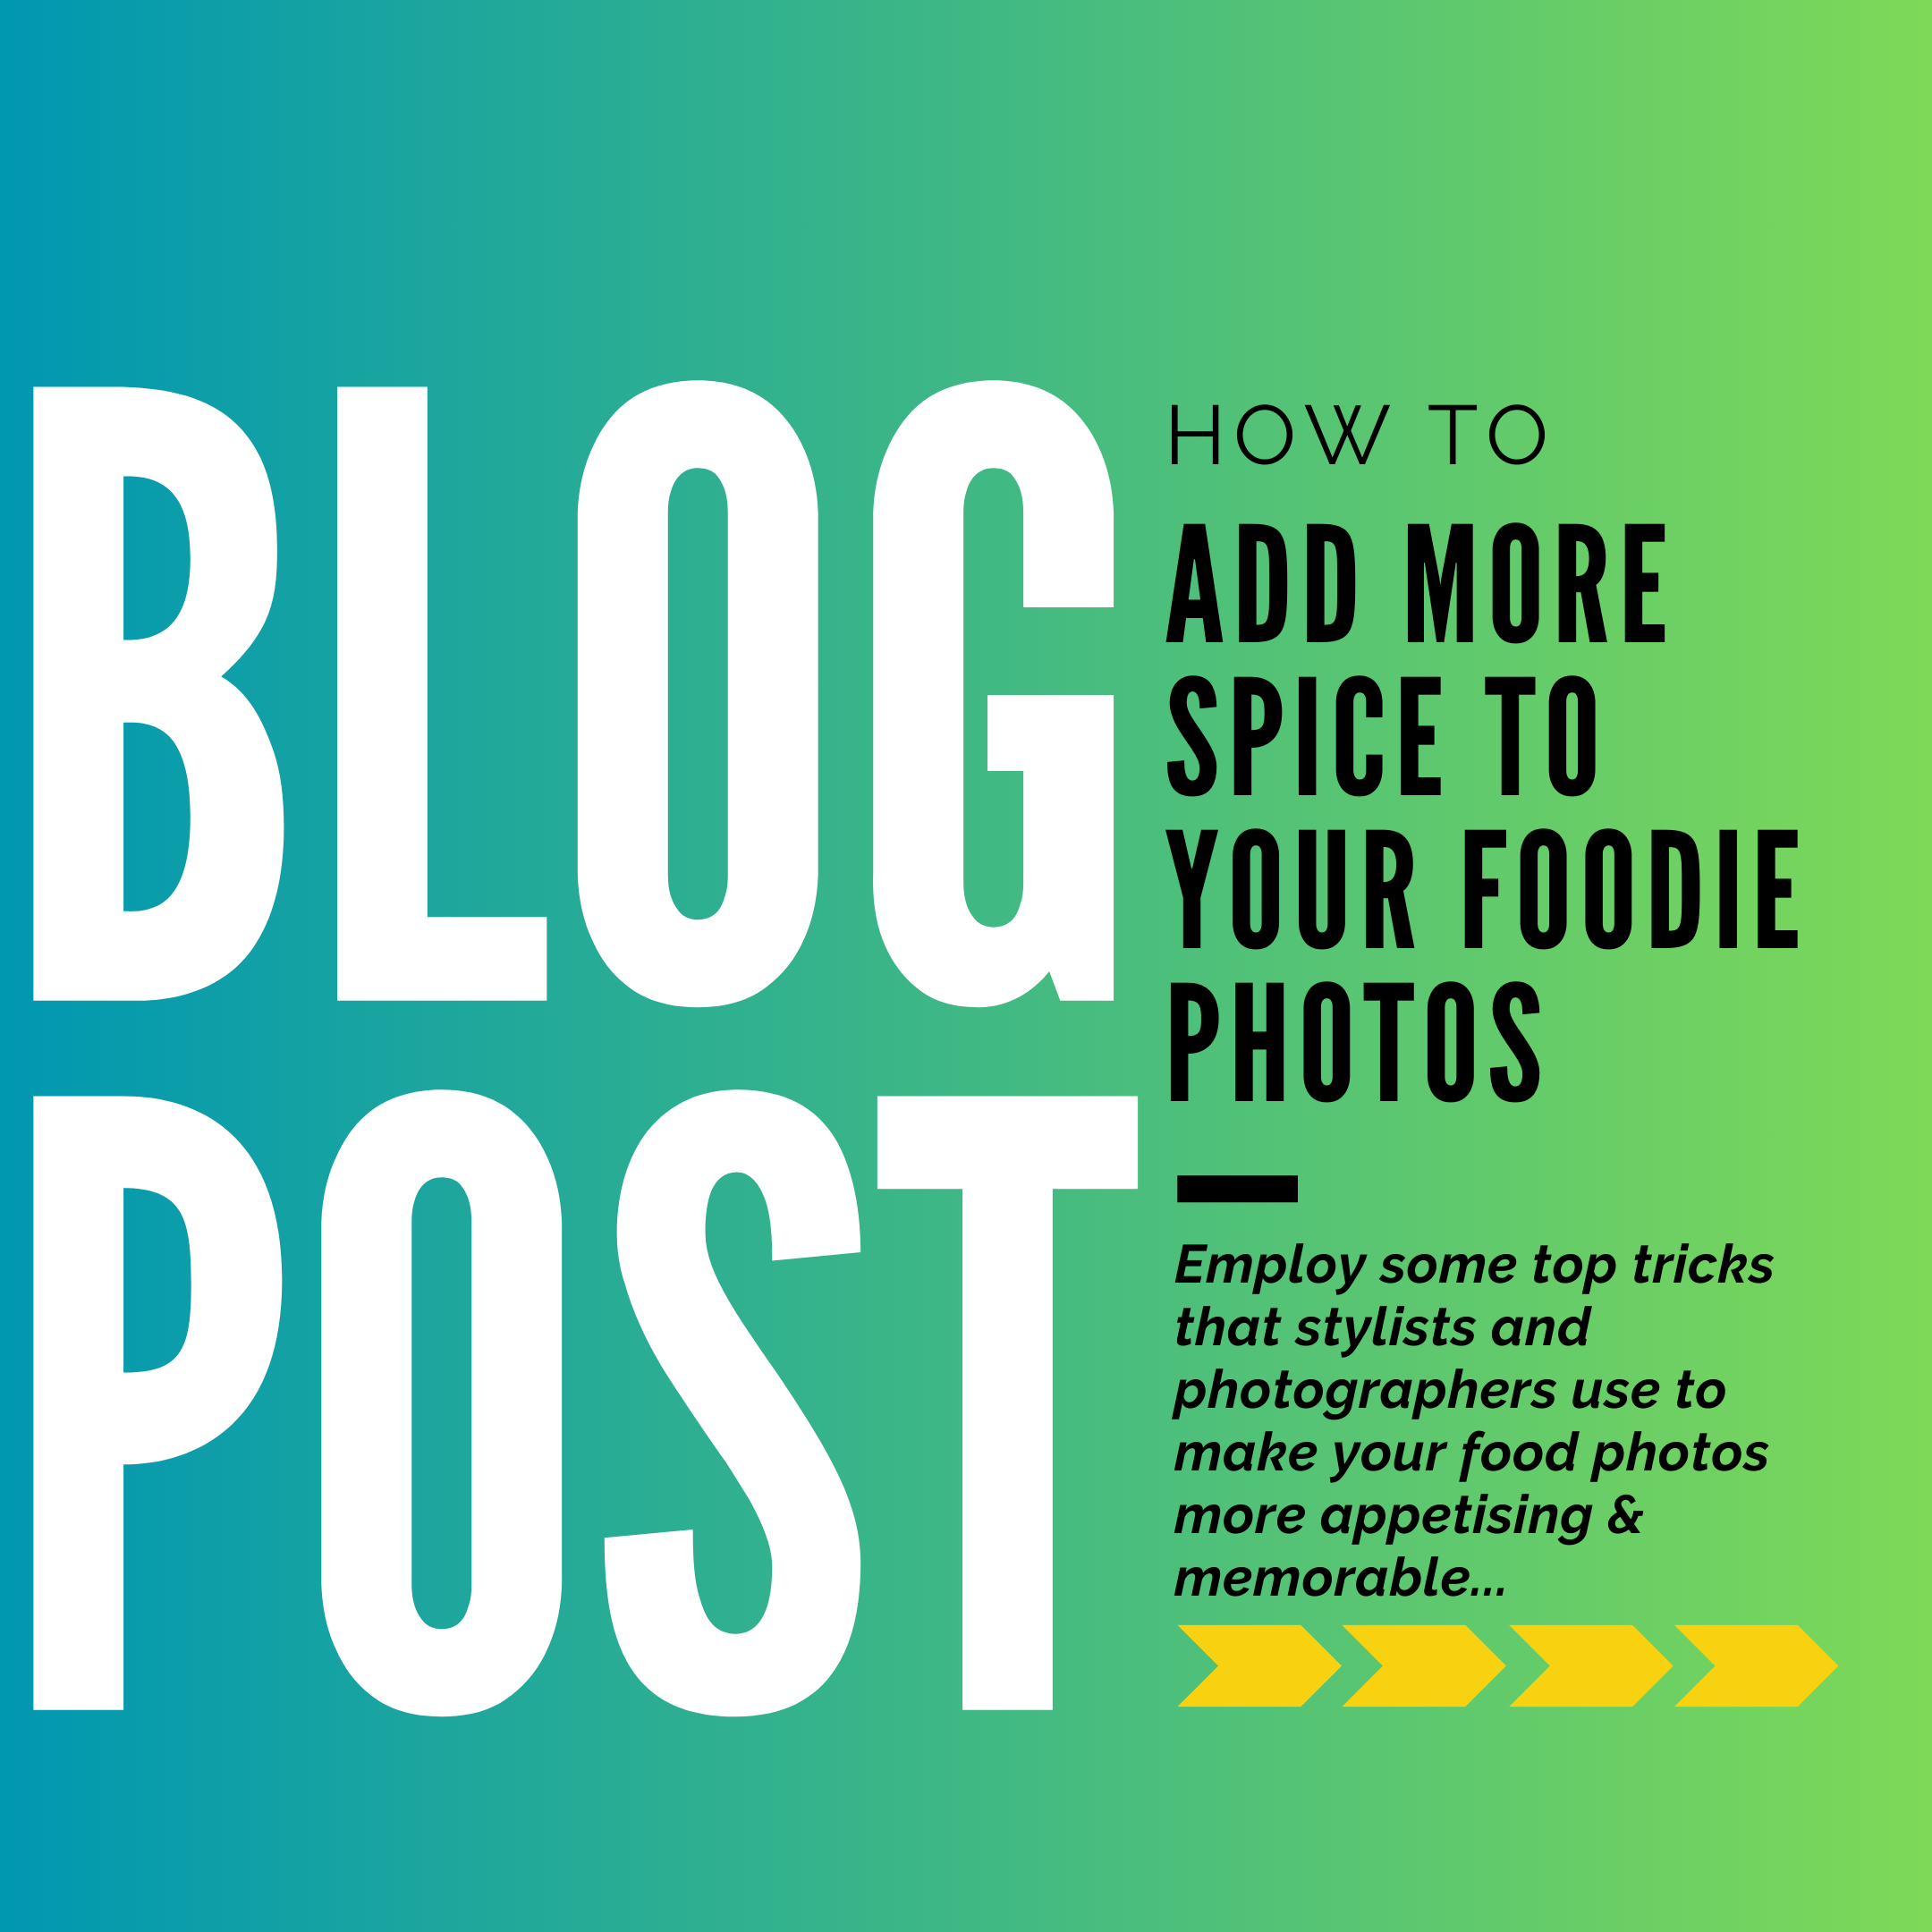 How to add more spice to your foodie photos